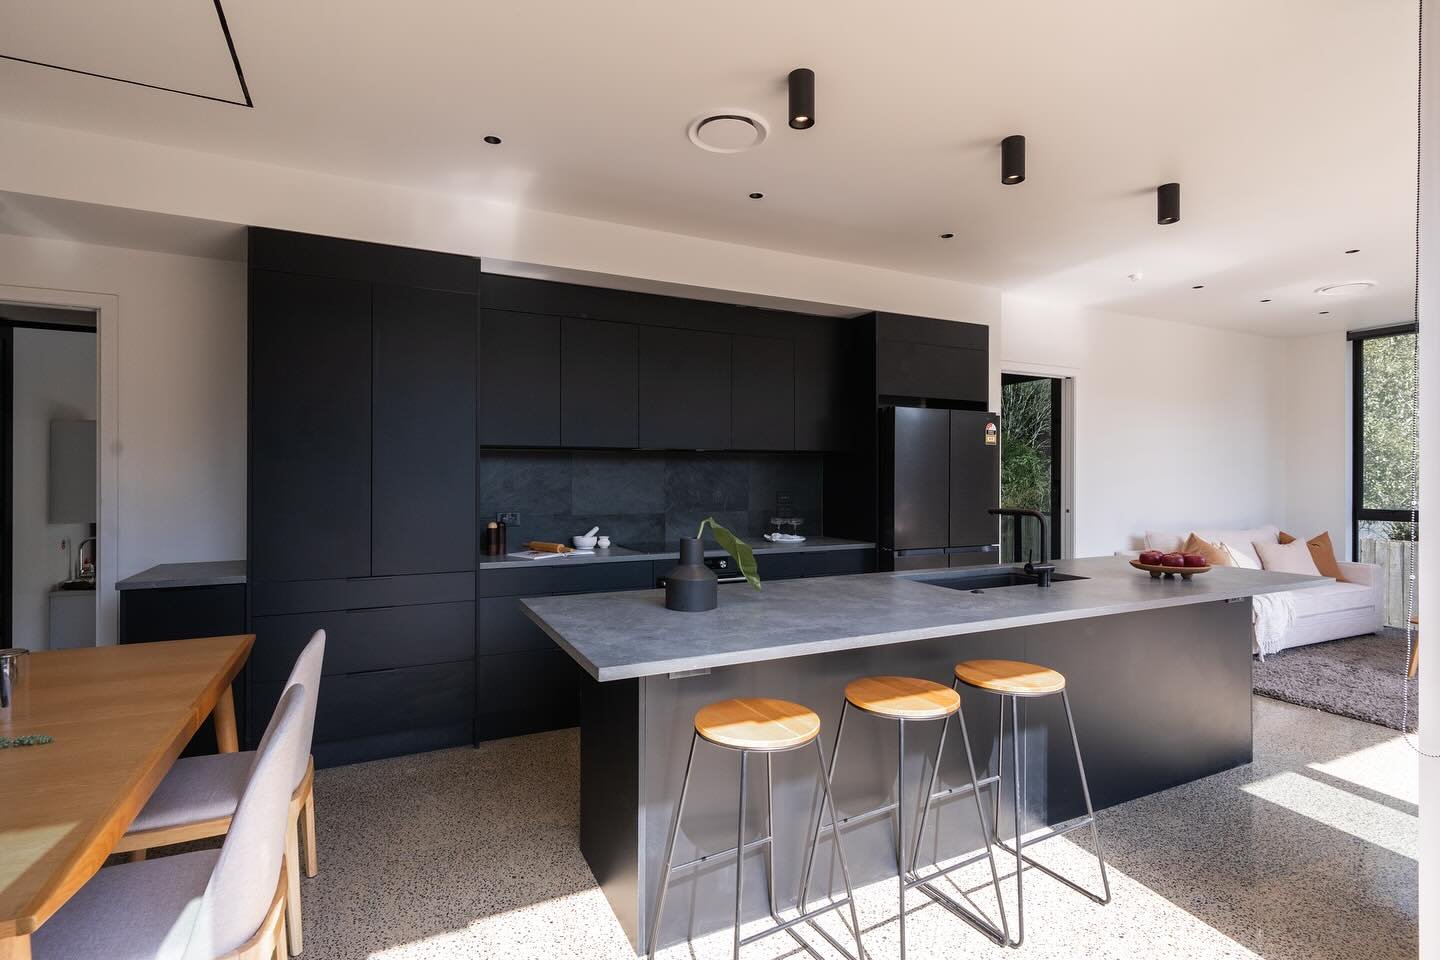 Kitchen, living space in house one of our Glendowie Project. 

Layout was key in the design as the client wanted to maximise the indoor/outdoor flow, while still keeping the comfort of a living area. 

Having the polished concrete finished floor, wit